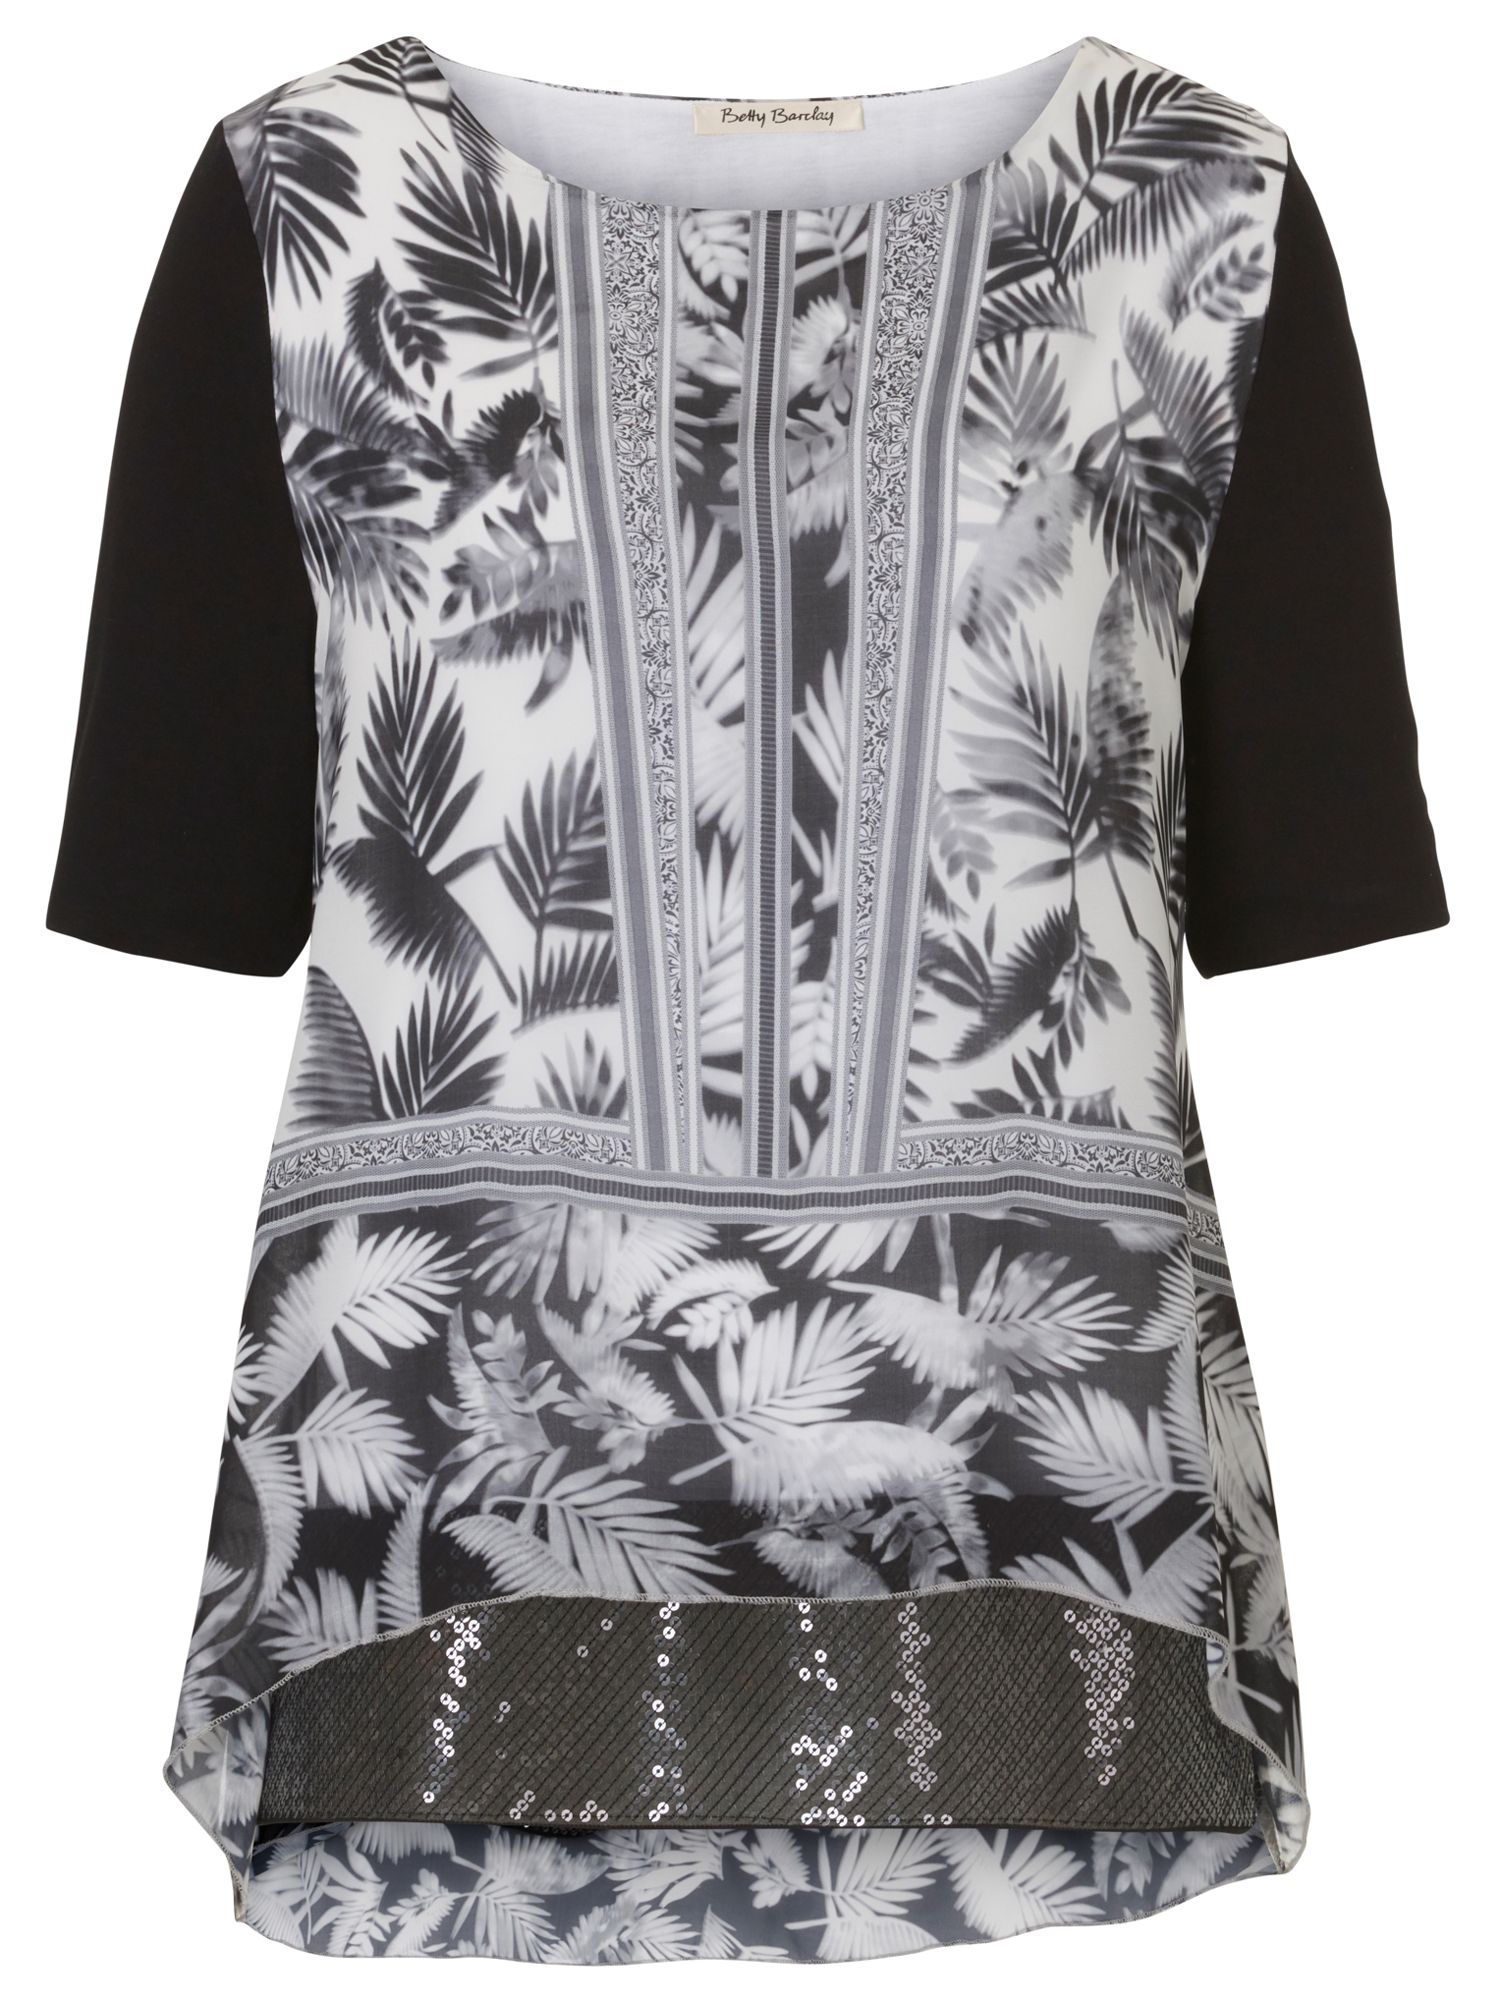 Betty Barclay Print and Sequin Tunic Top, Black/White